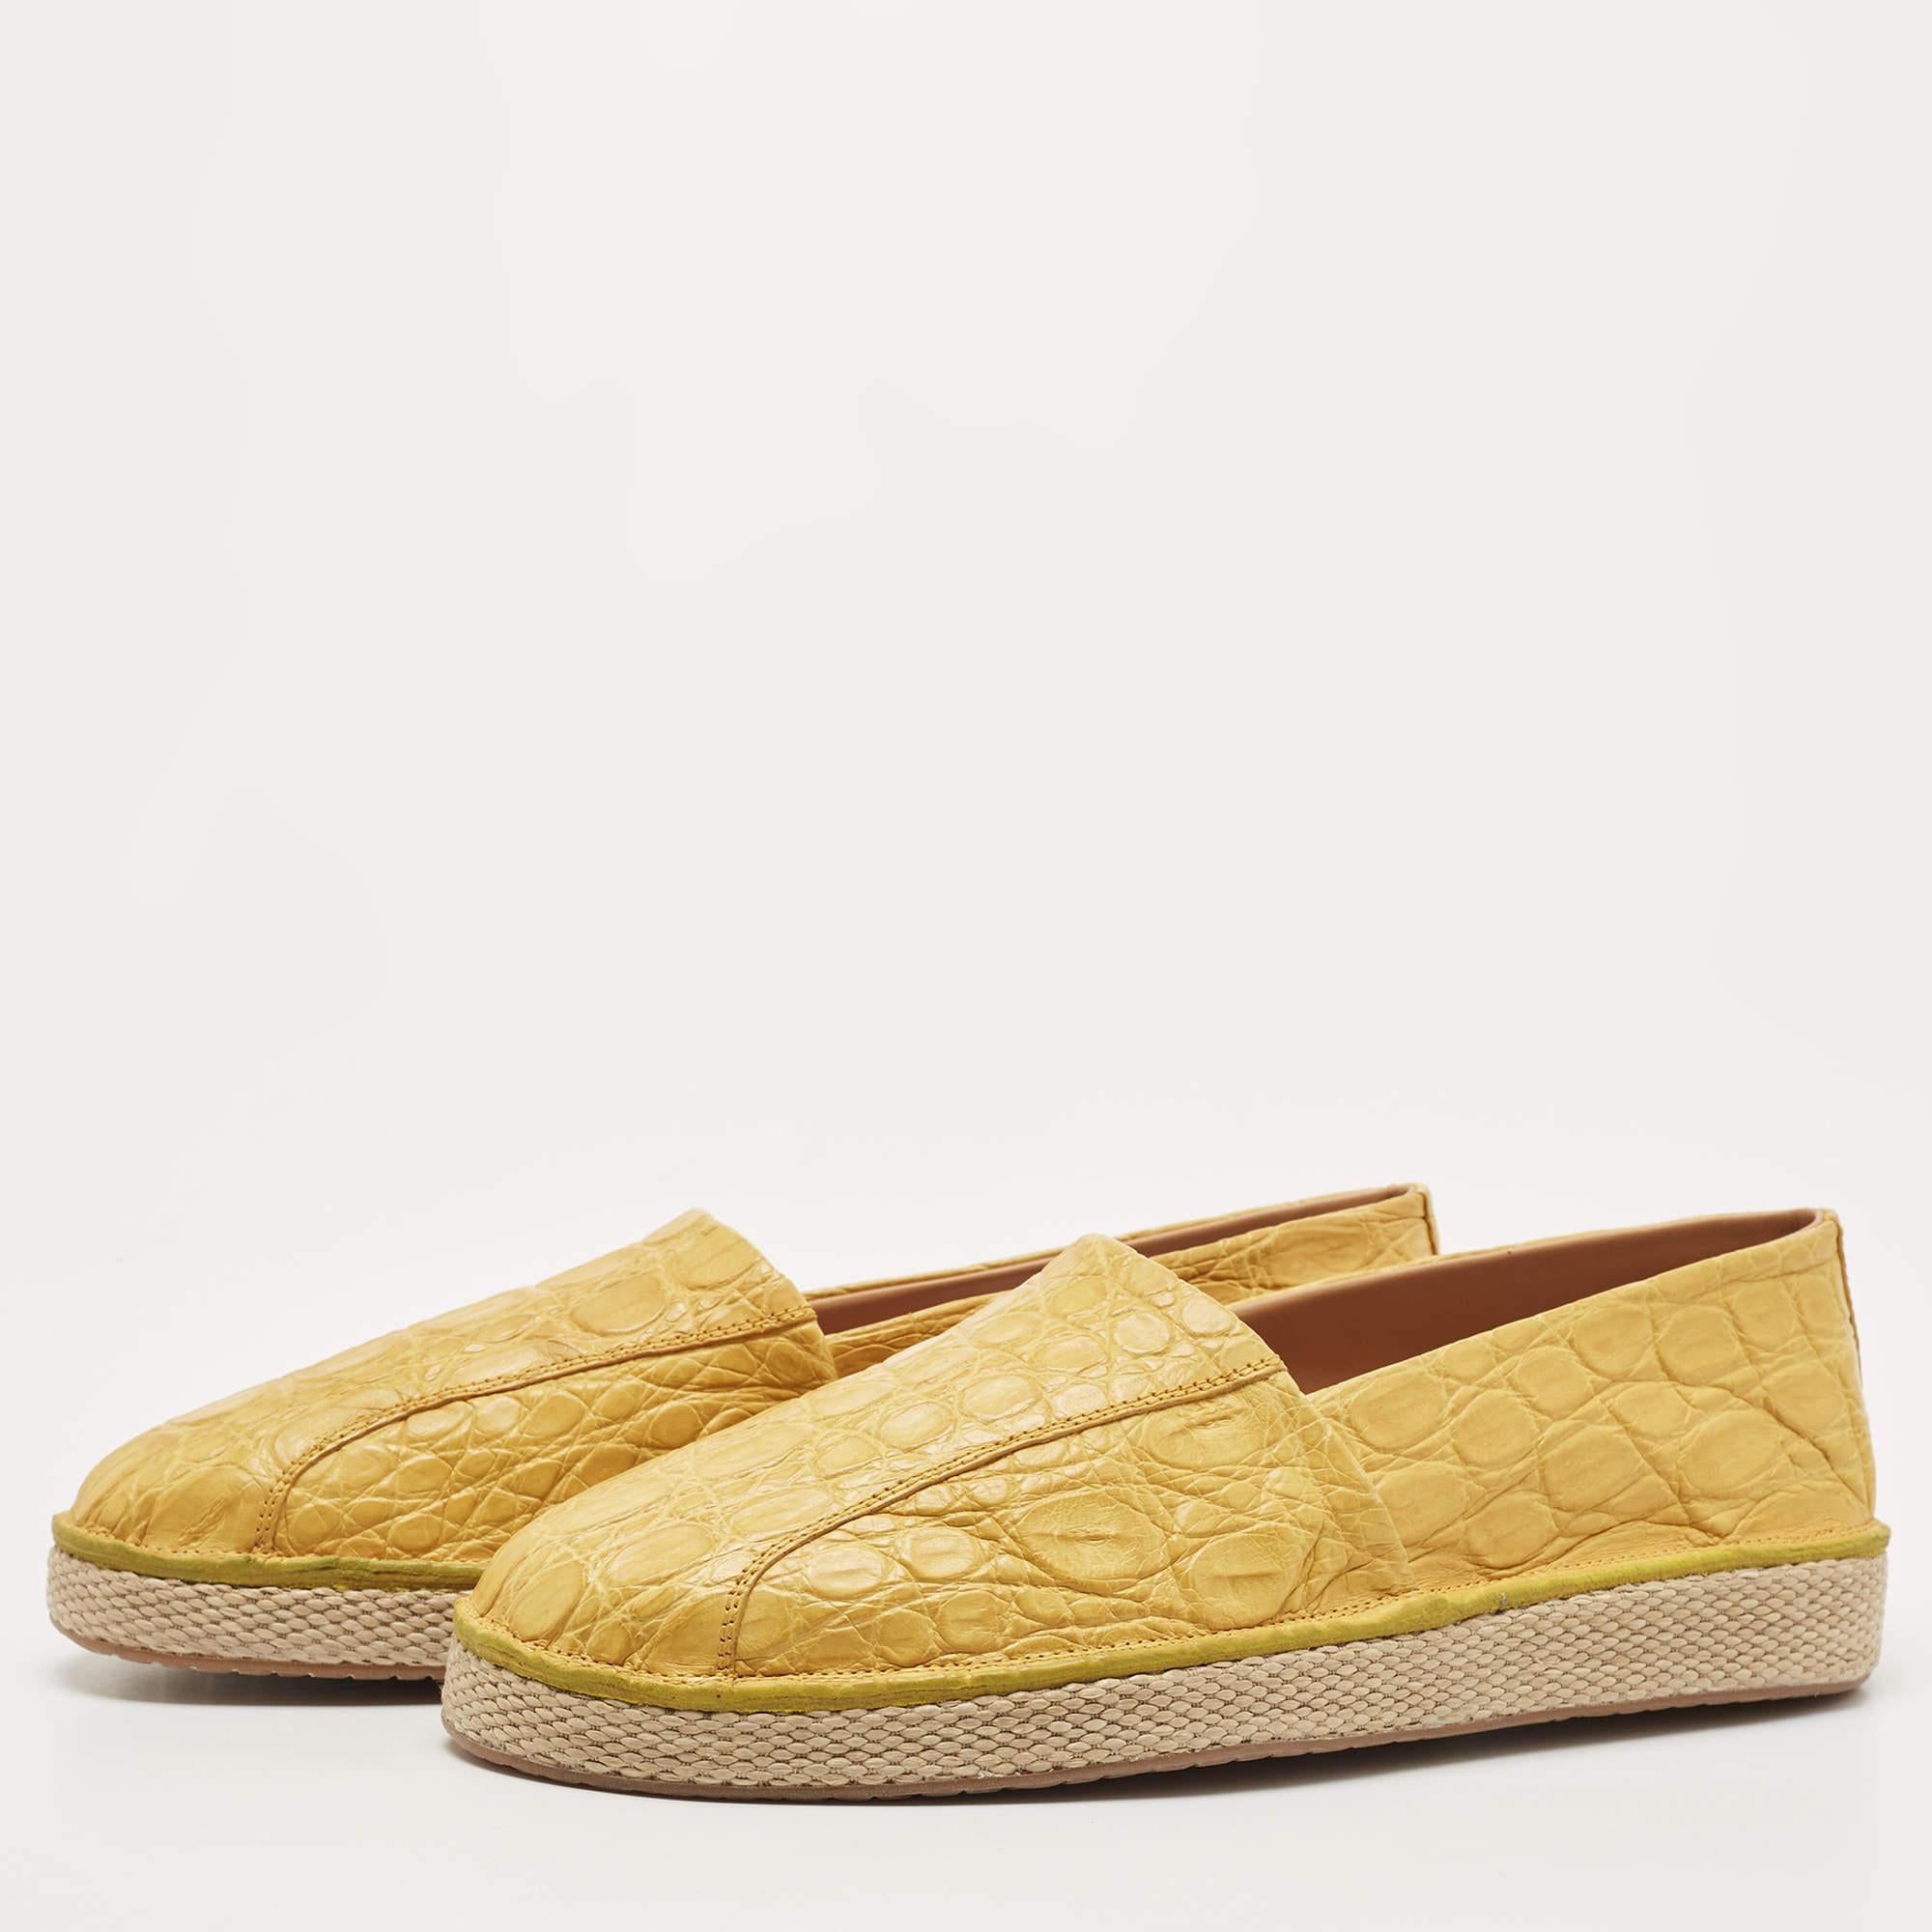 Celebrating the fusion of fine craftsmanship and luxury fashion, these Lampedusa espadrilles from Salvatore Ferragamo are treasures for your feet. They are formed using lizard leather and feature closed toes, braided midsoles, and comfortable